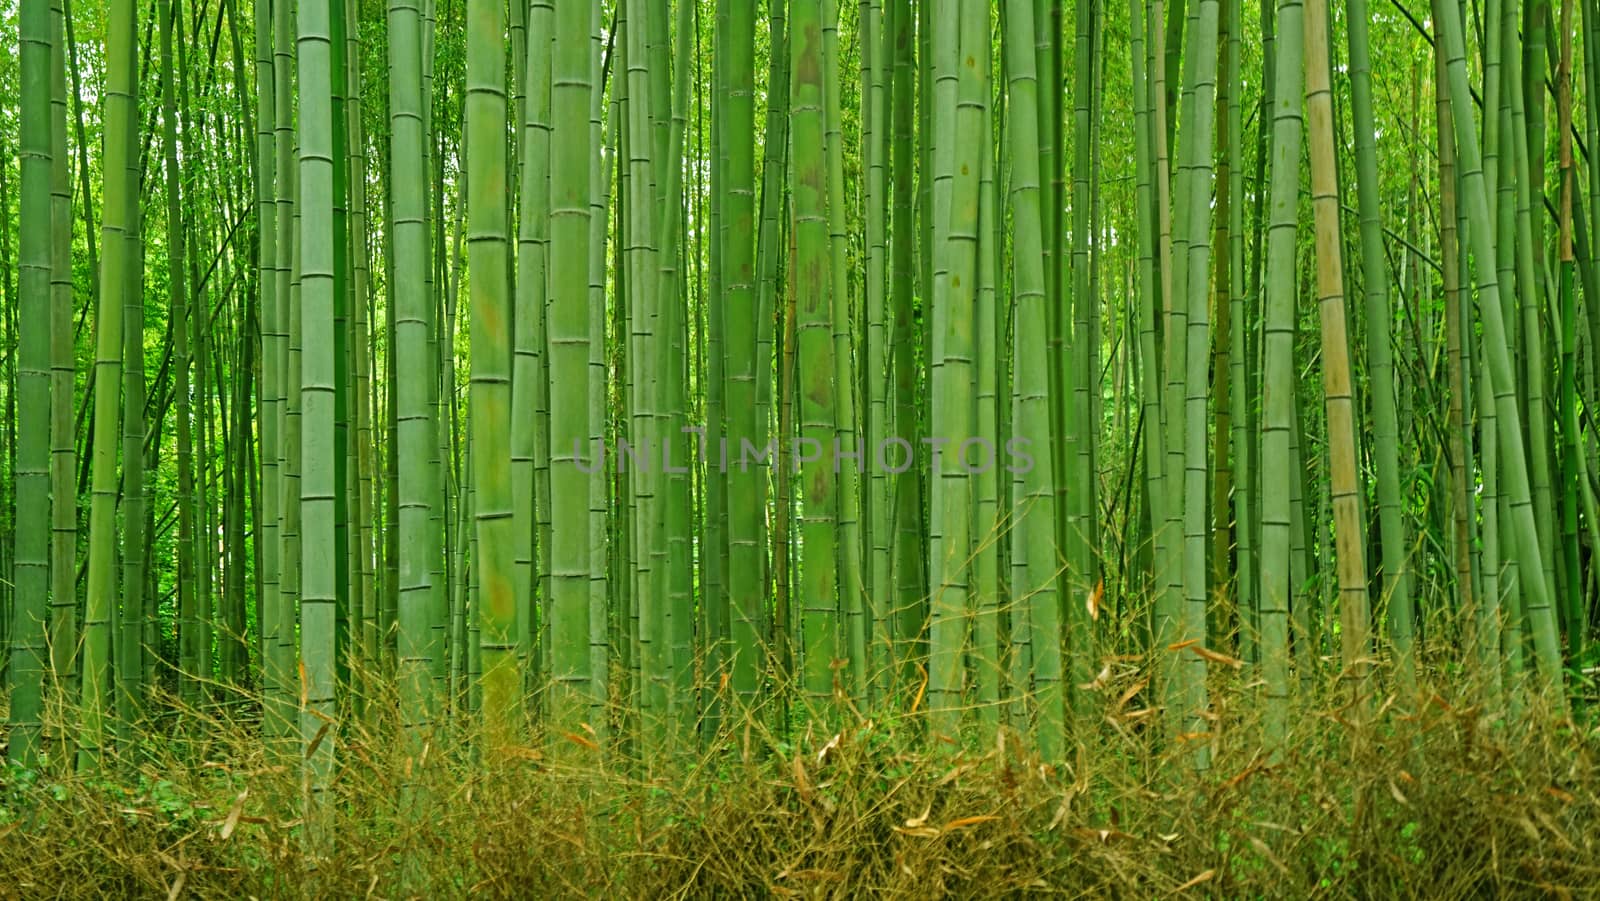 Green bamboo plant forest in Japan zen garden by cougarsan